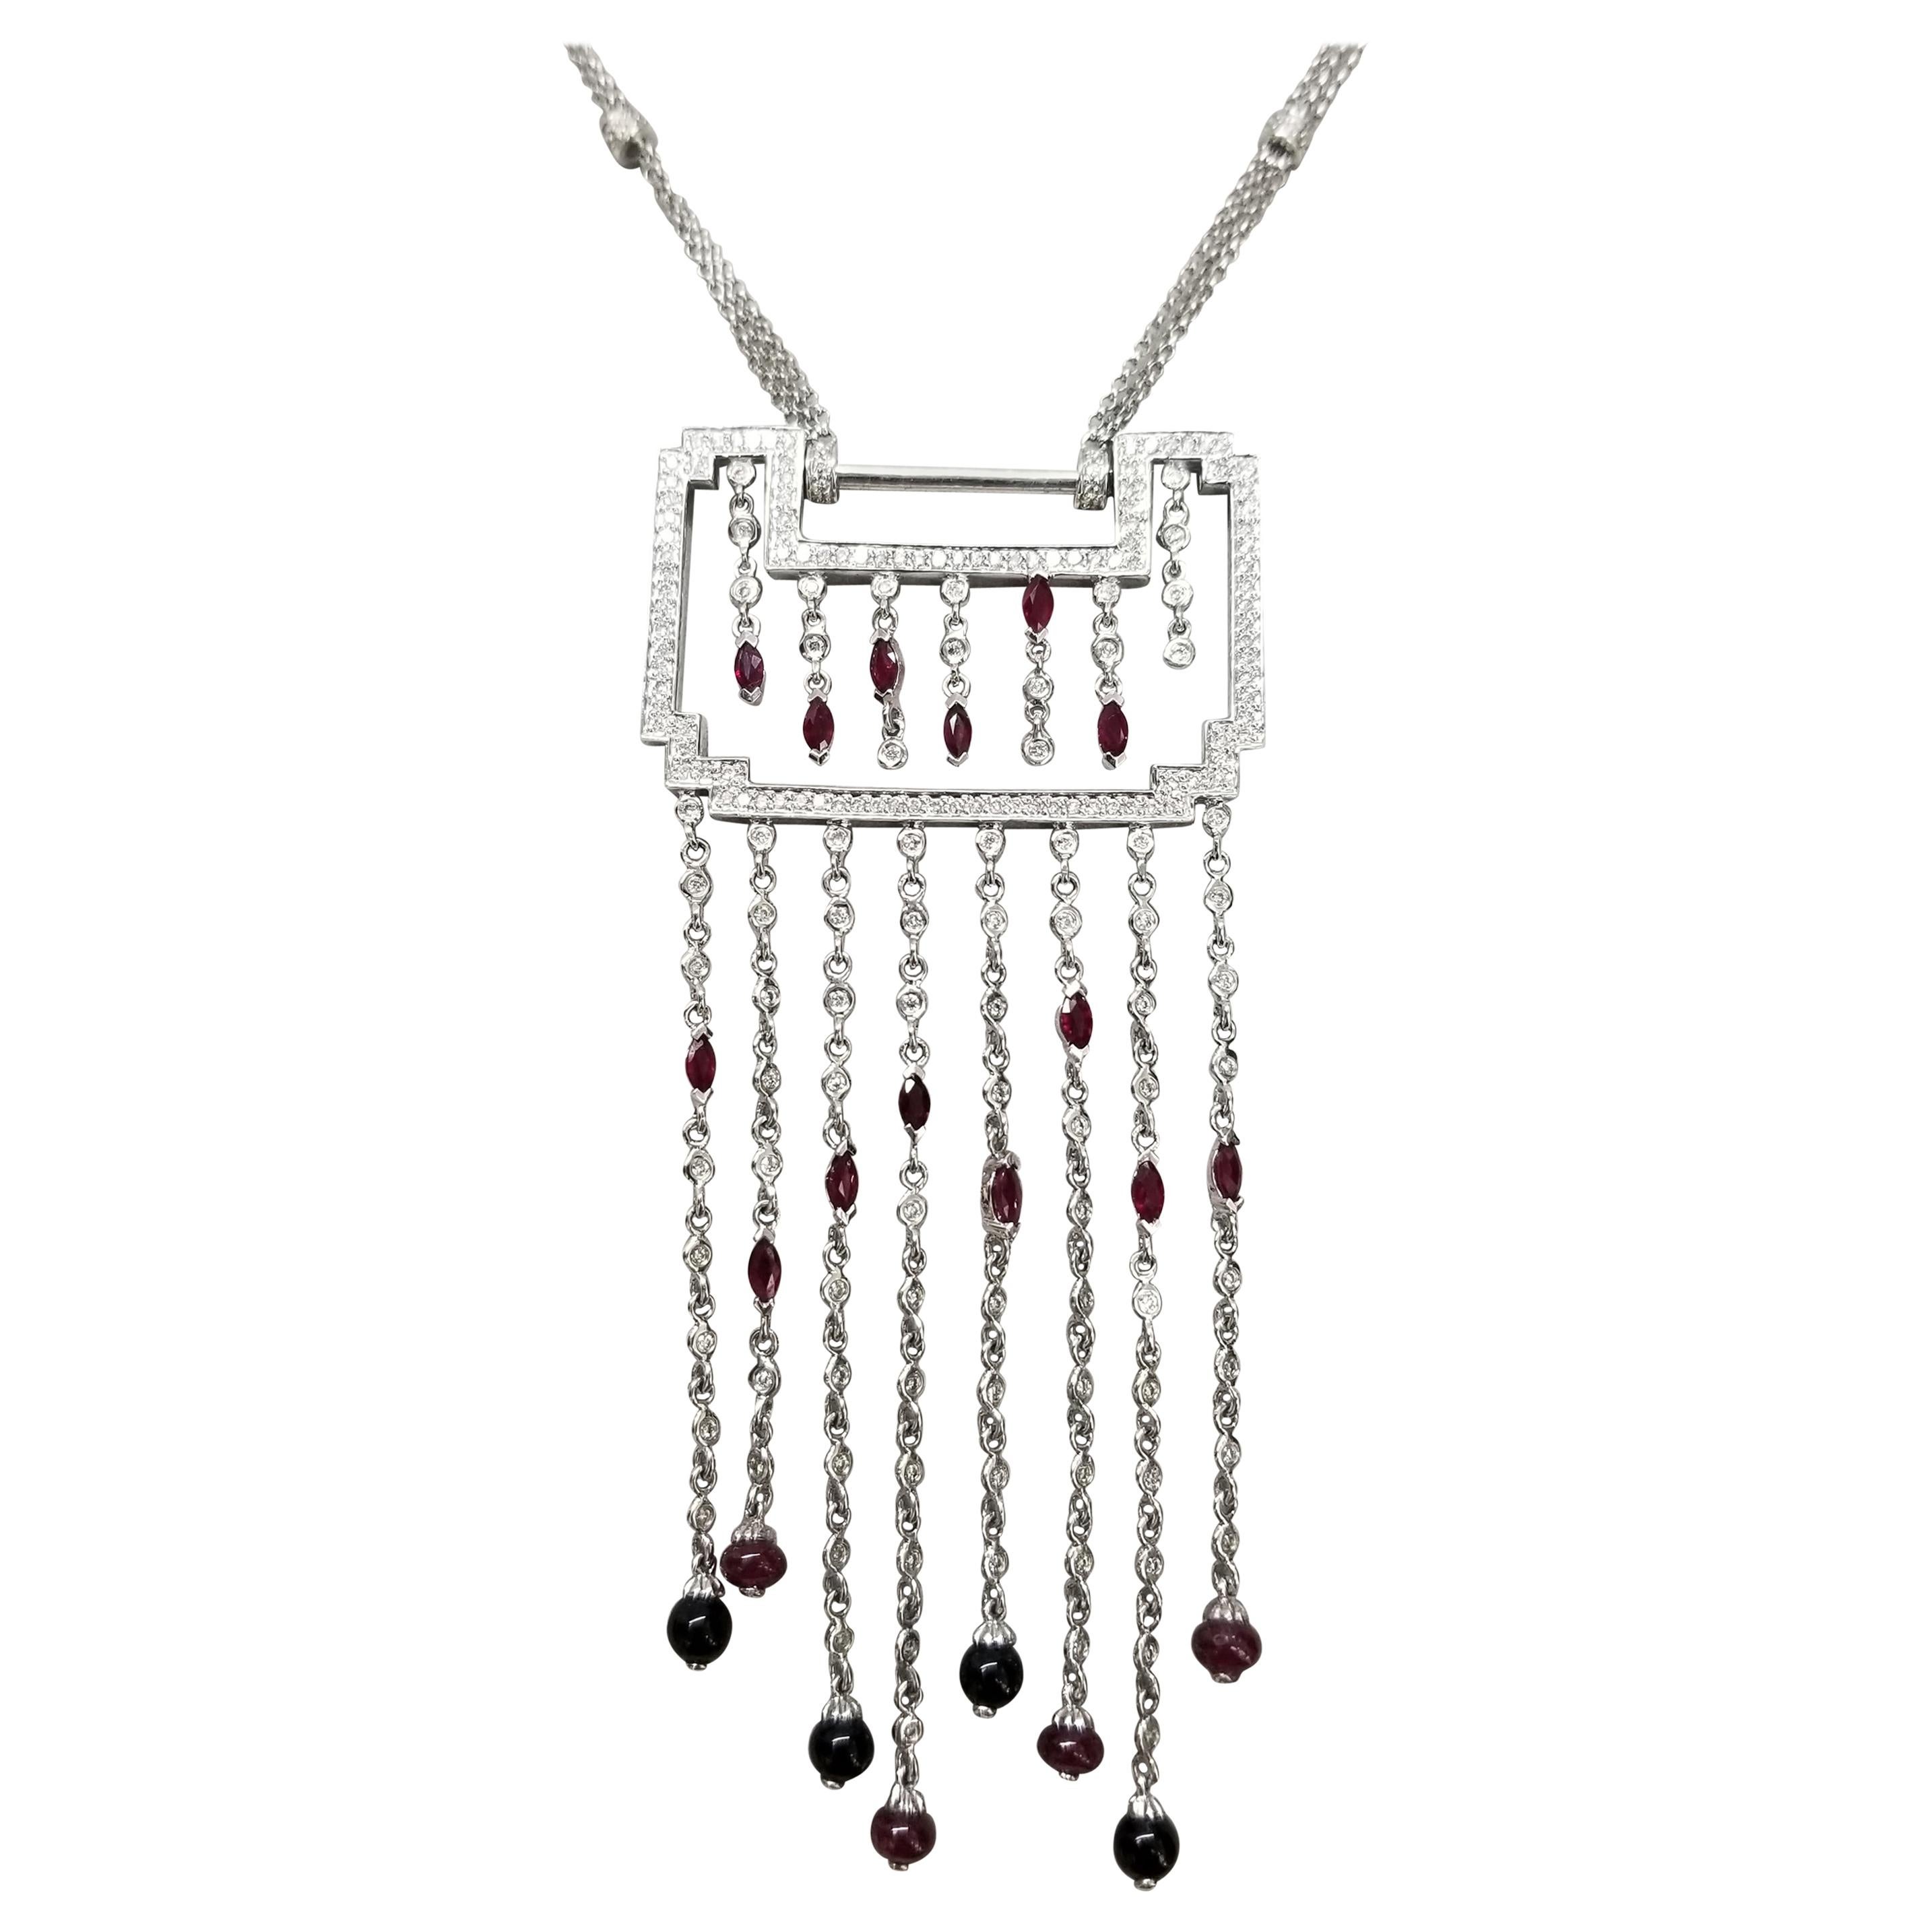 Art Deco Inspired Diamond 2.20 Carat and Ruby 1.10 Carat Necklace For Sale